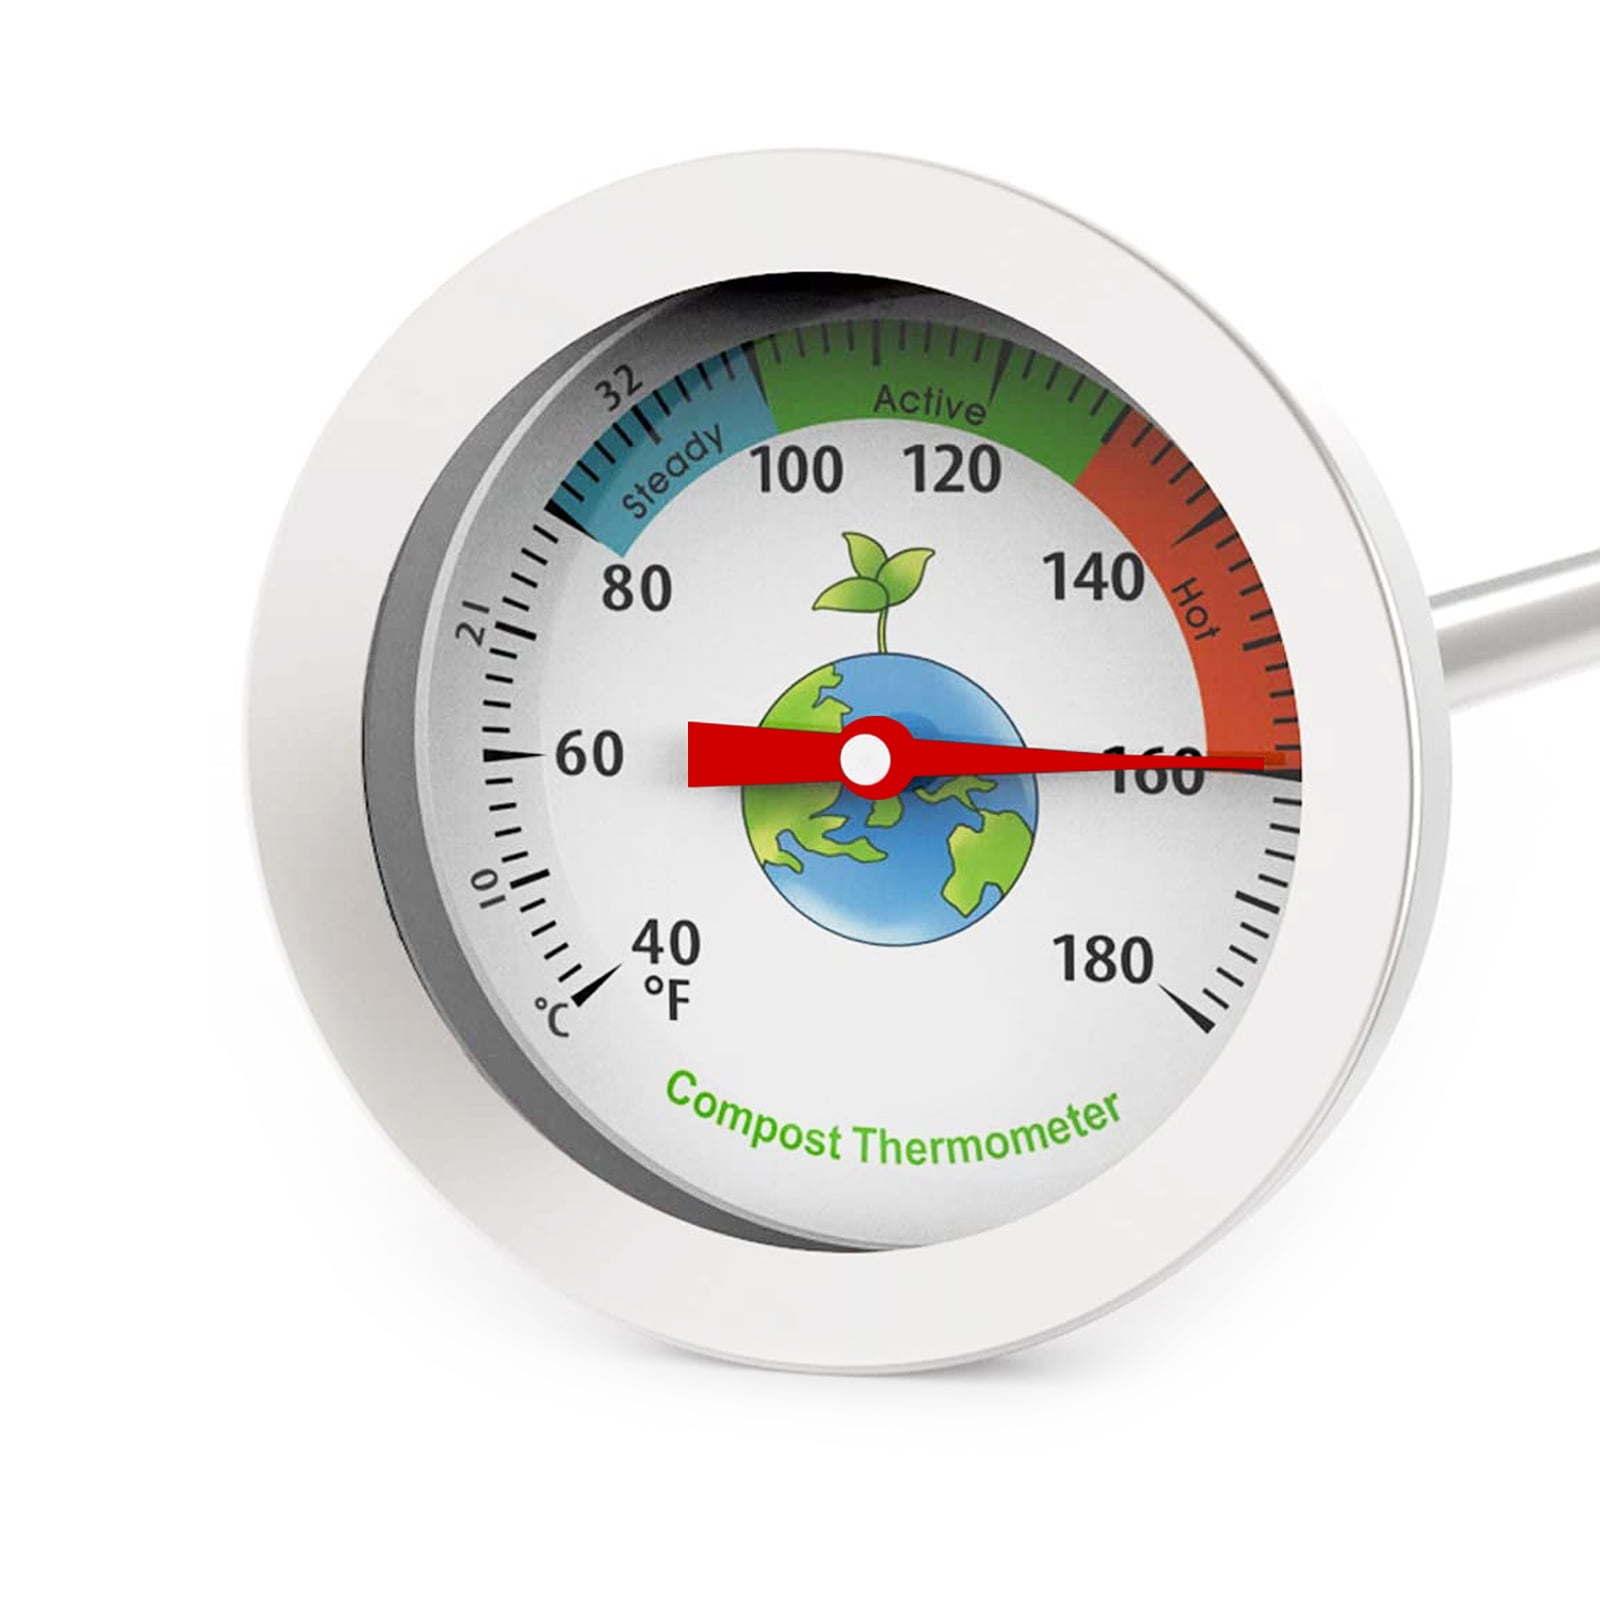 Compost Thermometer Stainless Steel Dial Thermometer for Home and Backyard